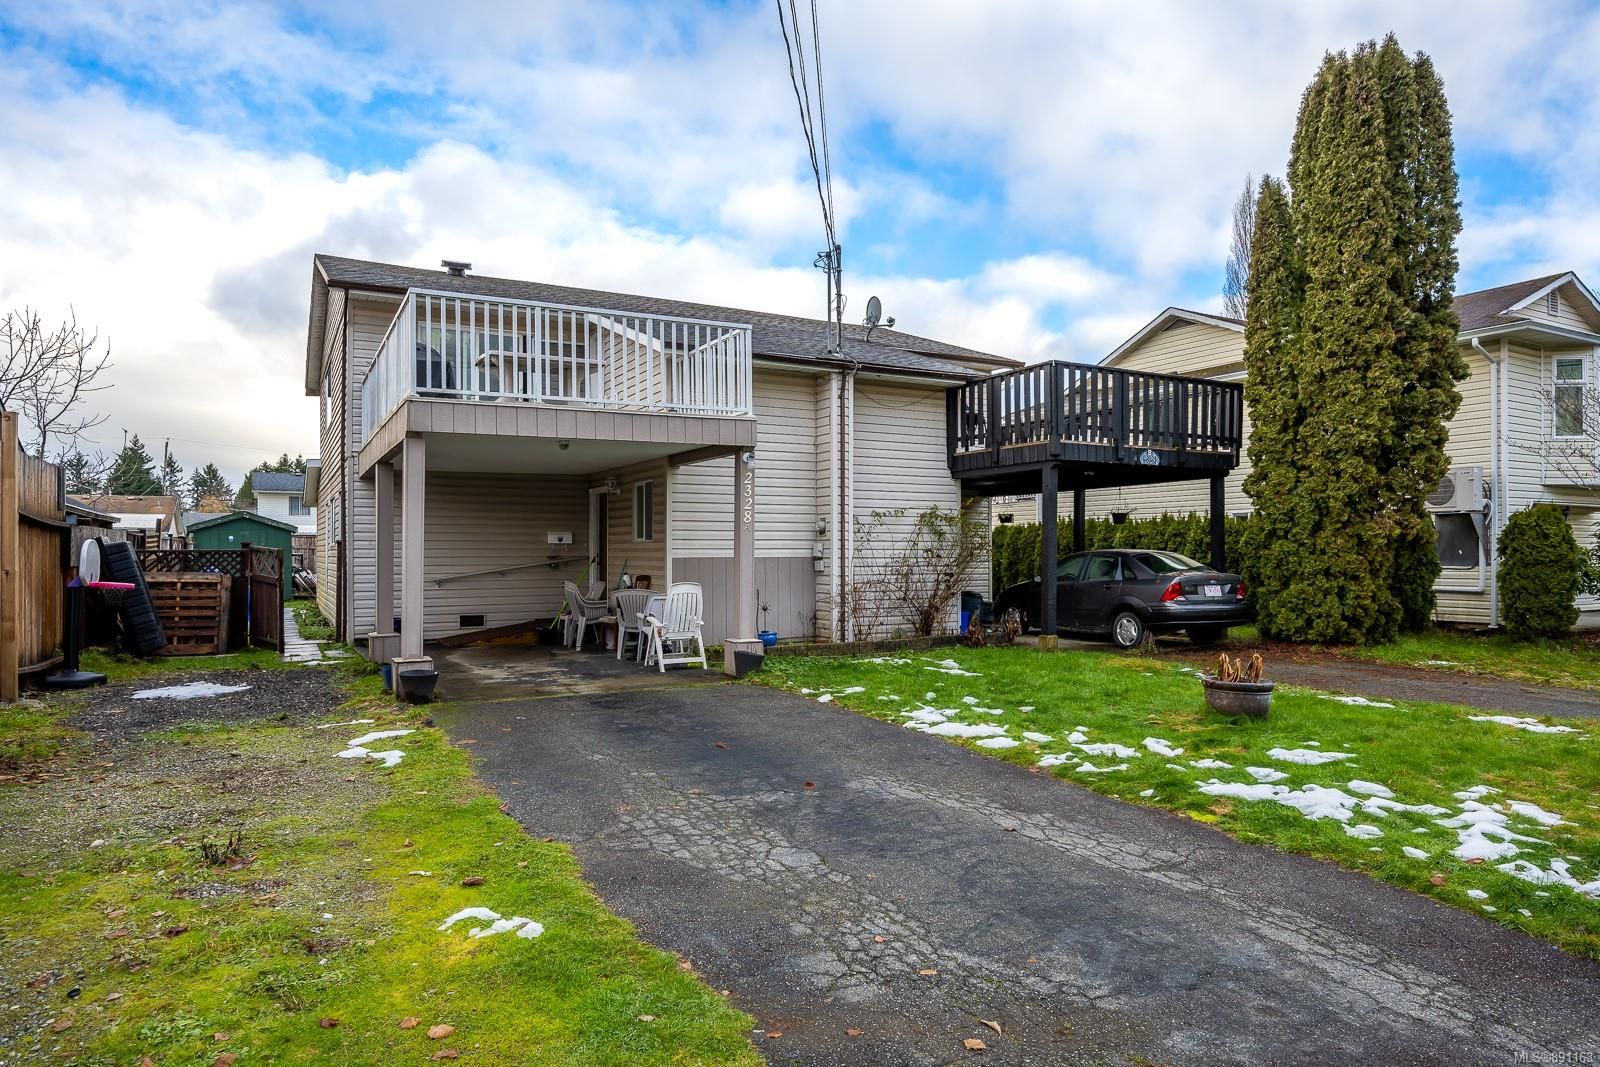 I have sold a property at A 2328 Urquhart Ave in Courtenay
